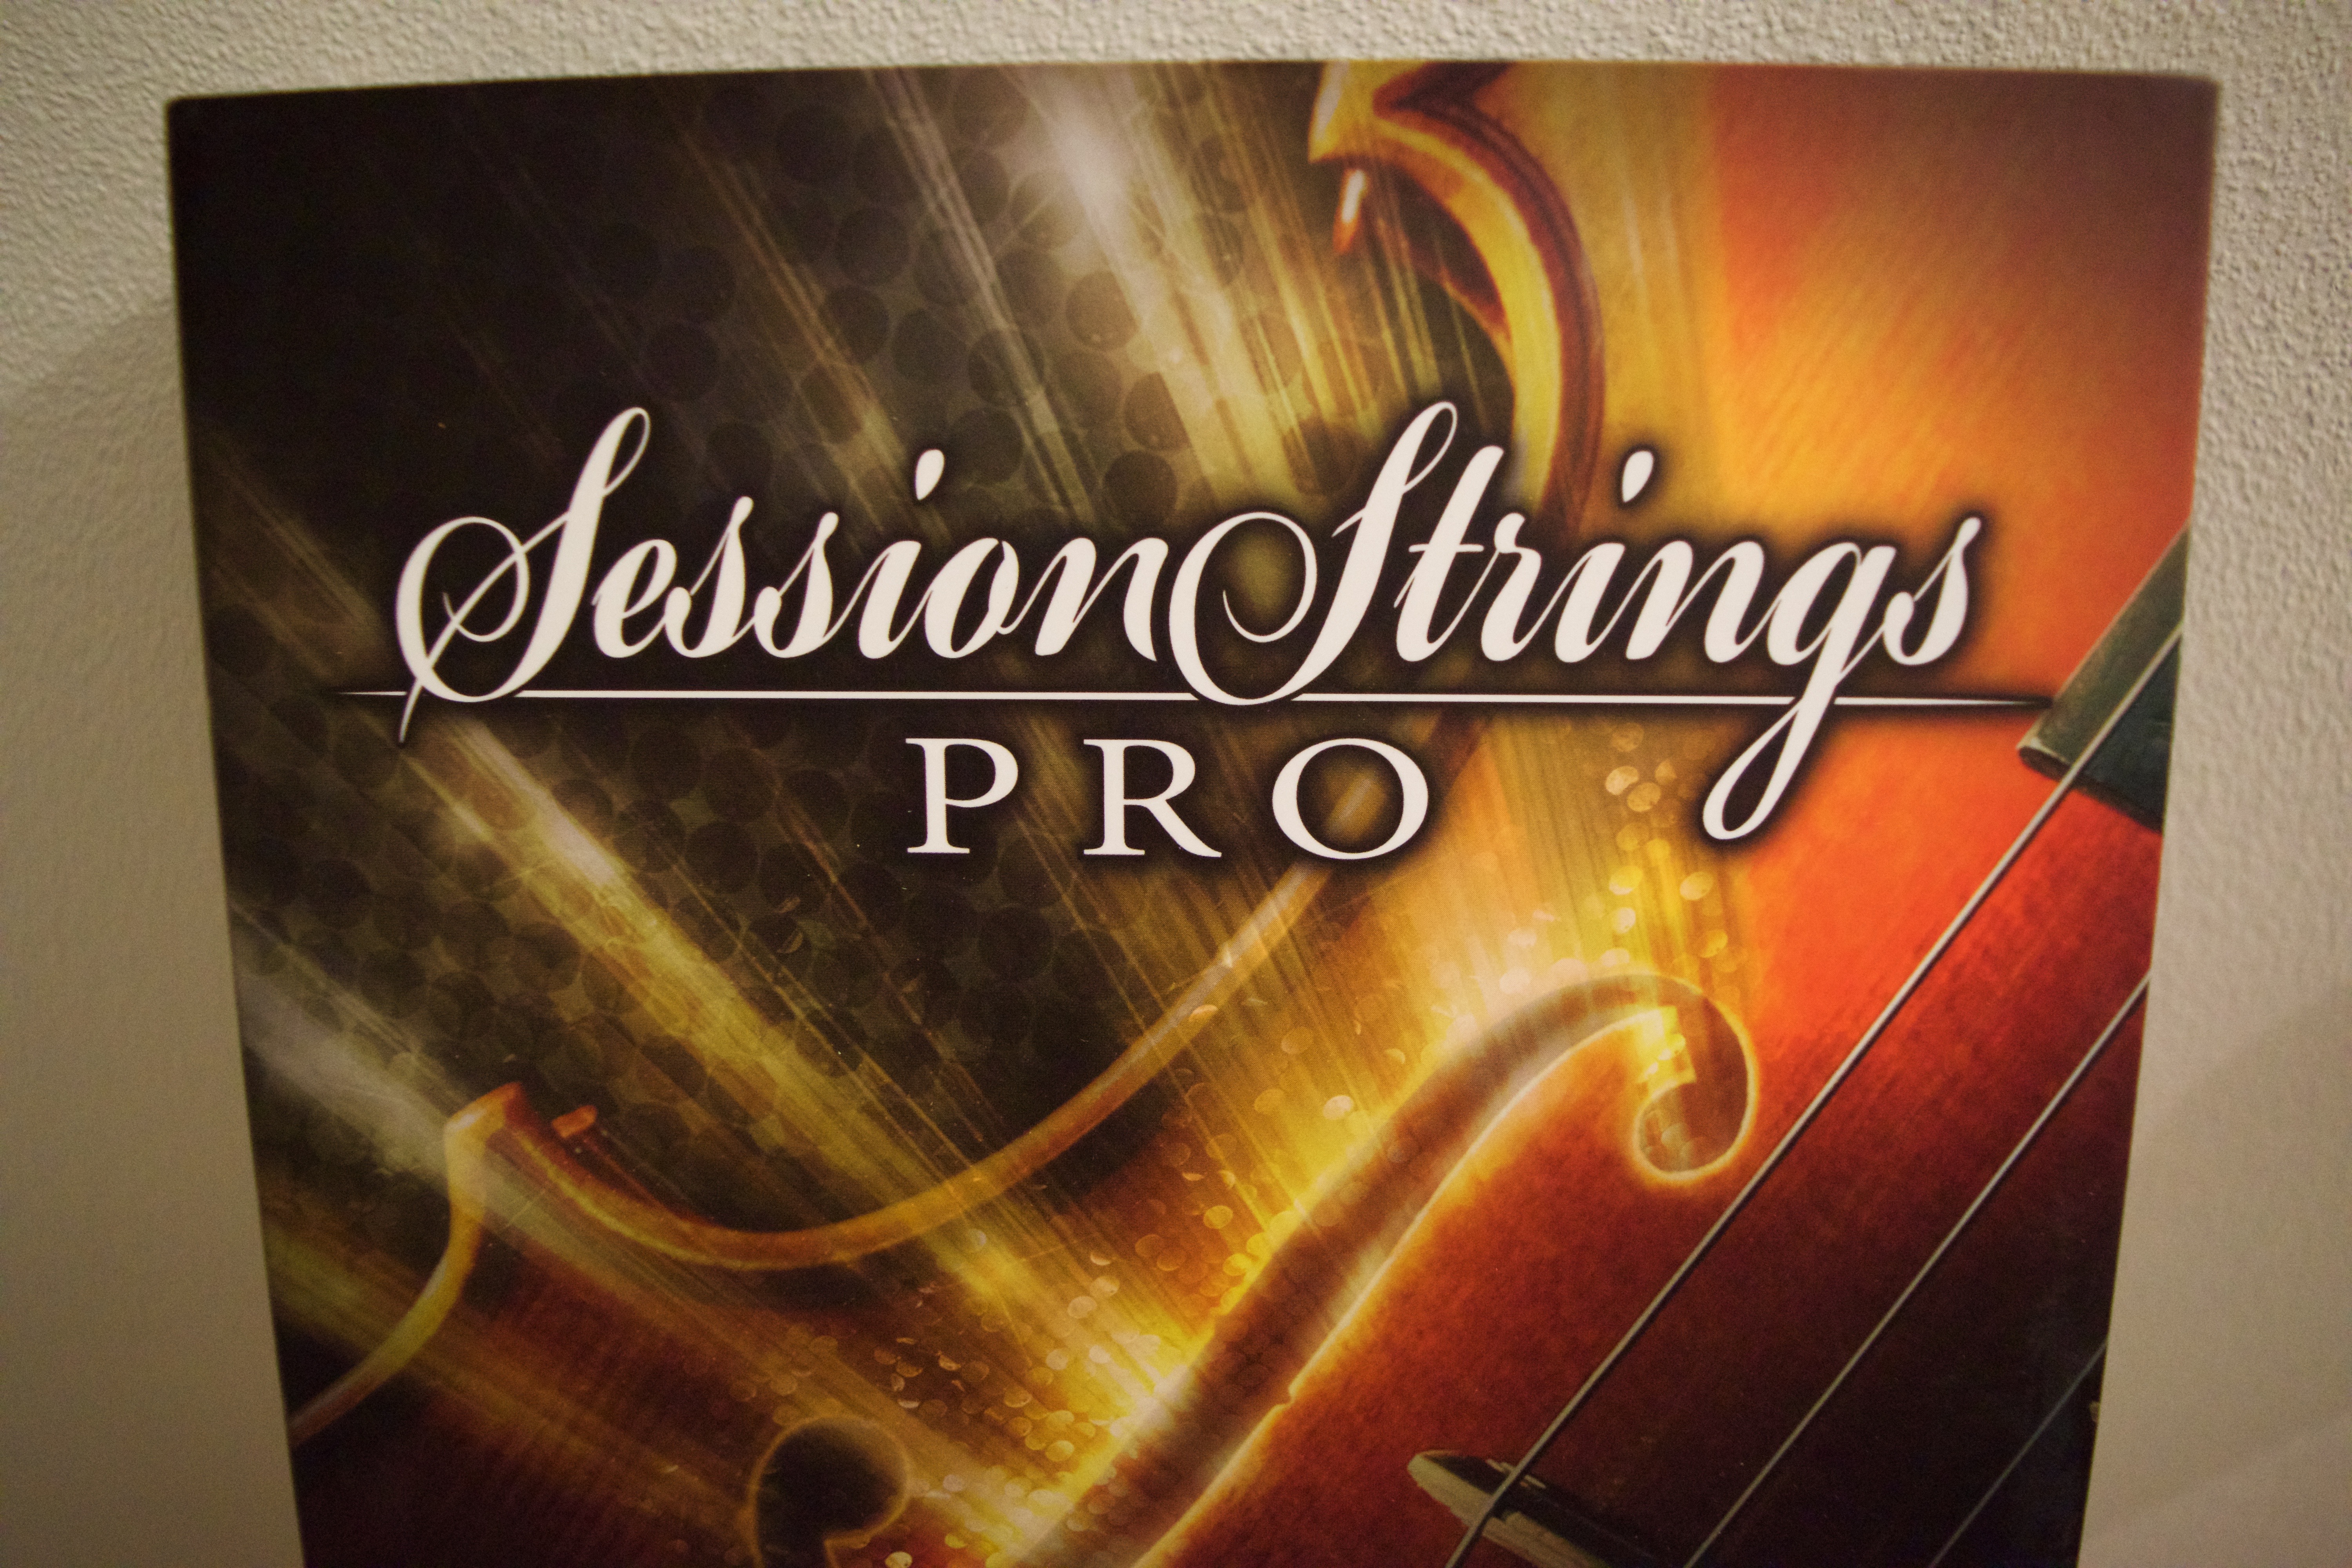 Native Instruments Session Strings Pro